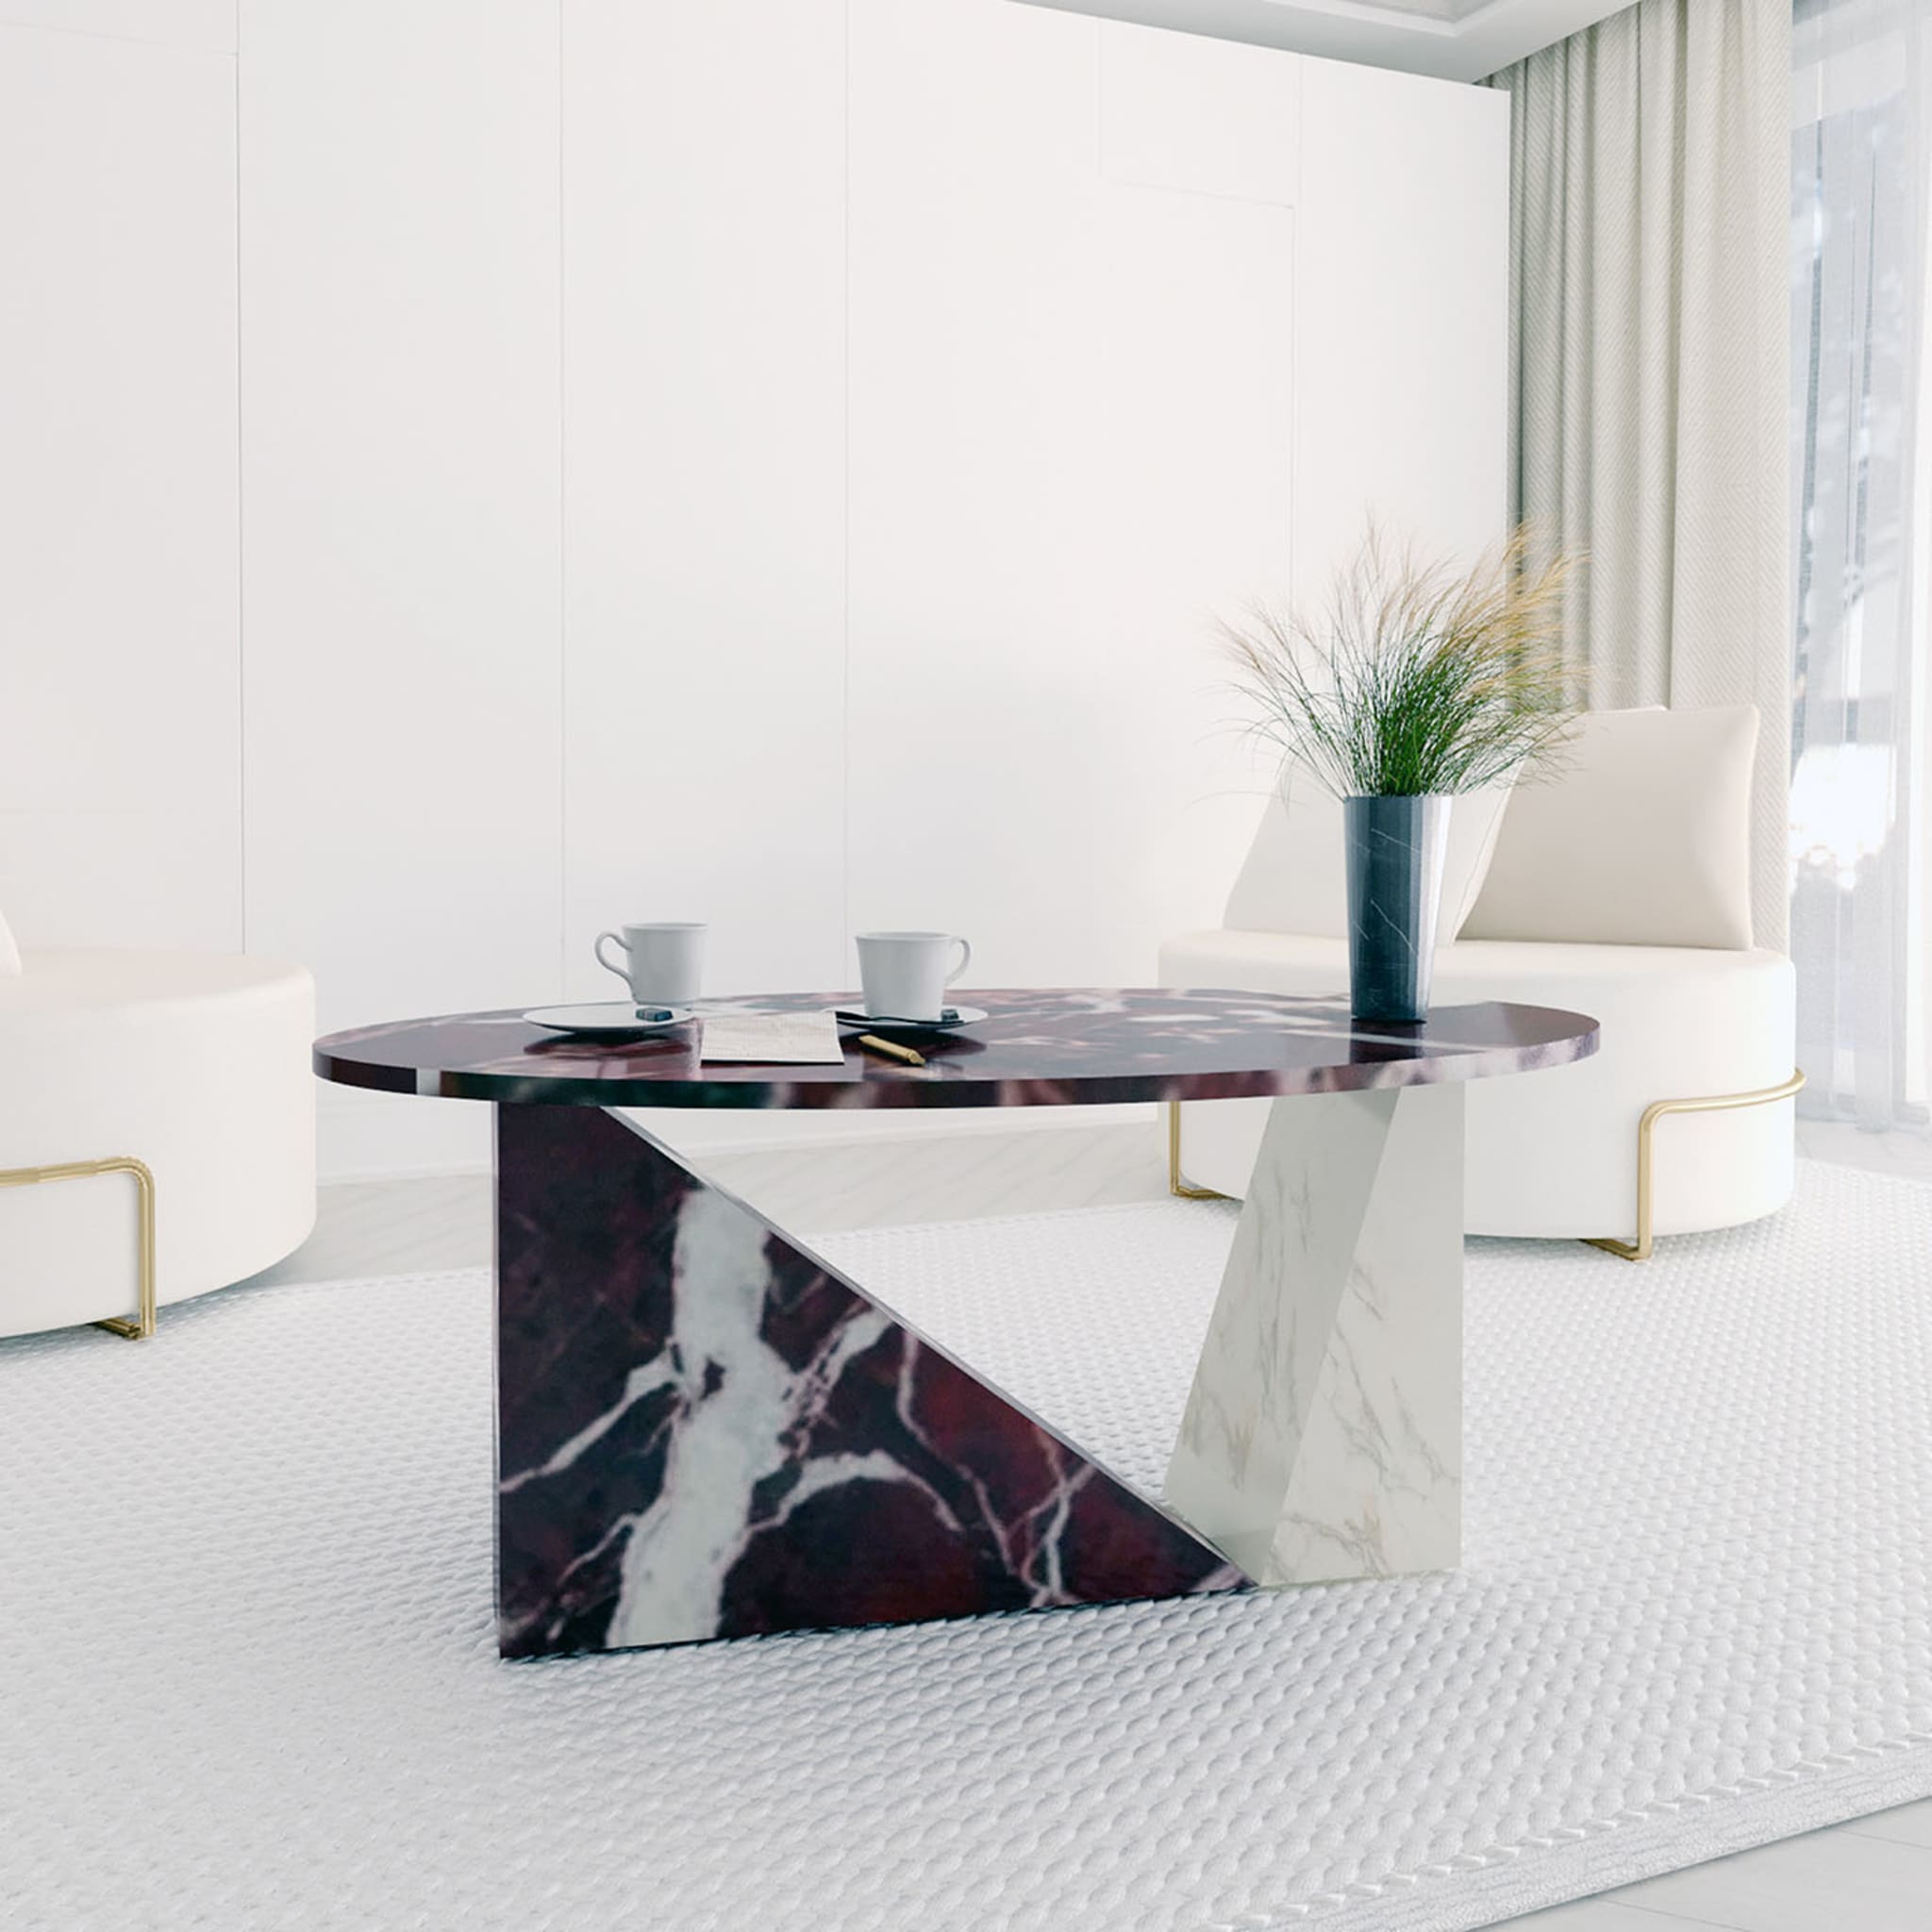 Dieus Coffee Table in Gold Calacatta and Red Levanto Marbles by sid&sign - Alternative view 1